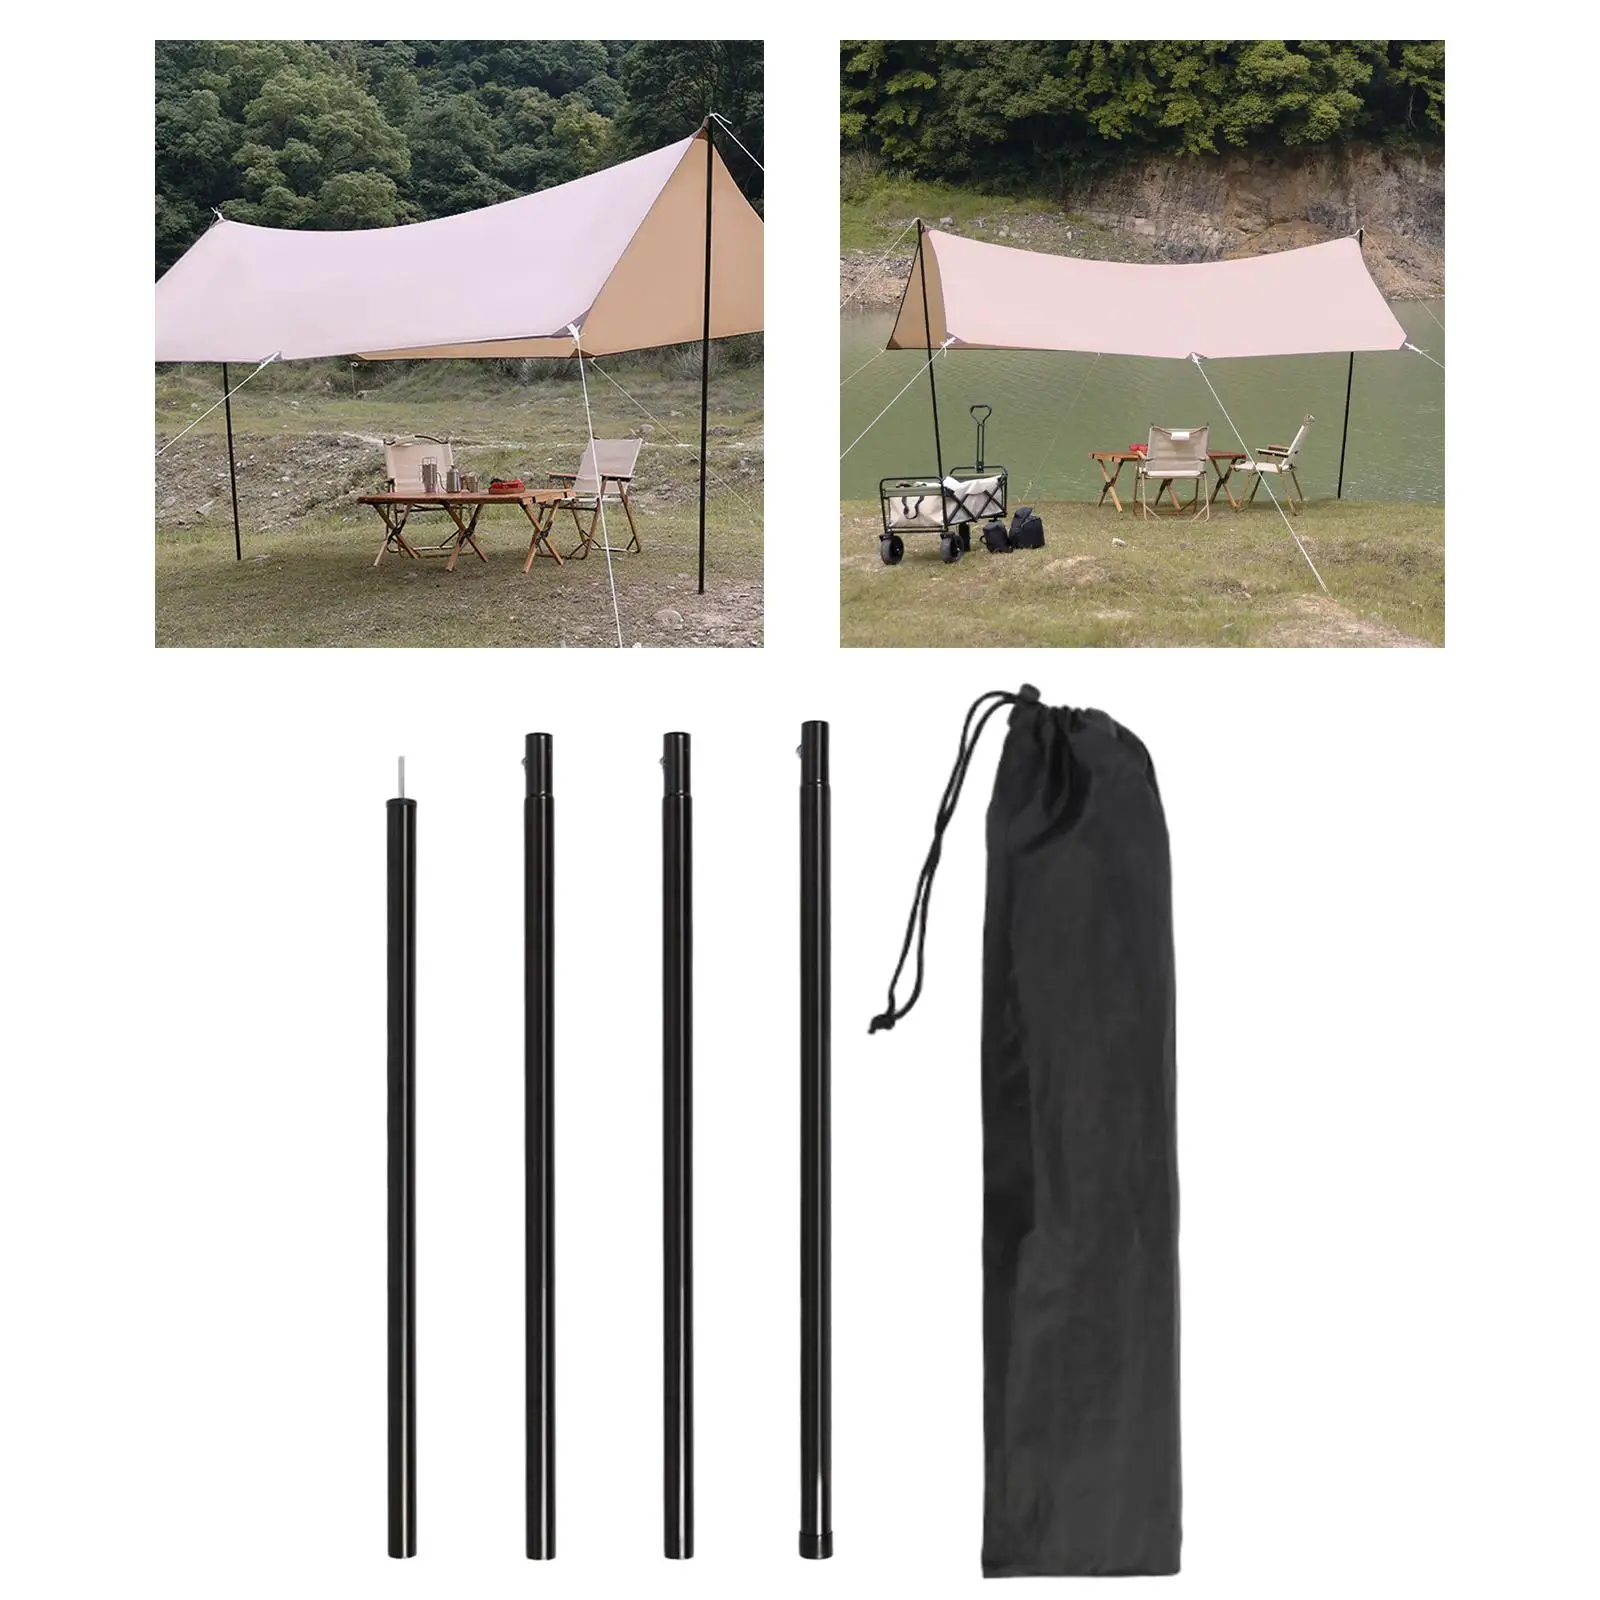 4 Pieces Tarp Poles Tent Rods Garden Shelter Awning Support Poles with Storage Bag Detachable for Camping Backpacking Hiking